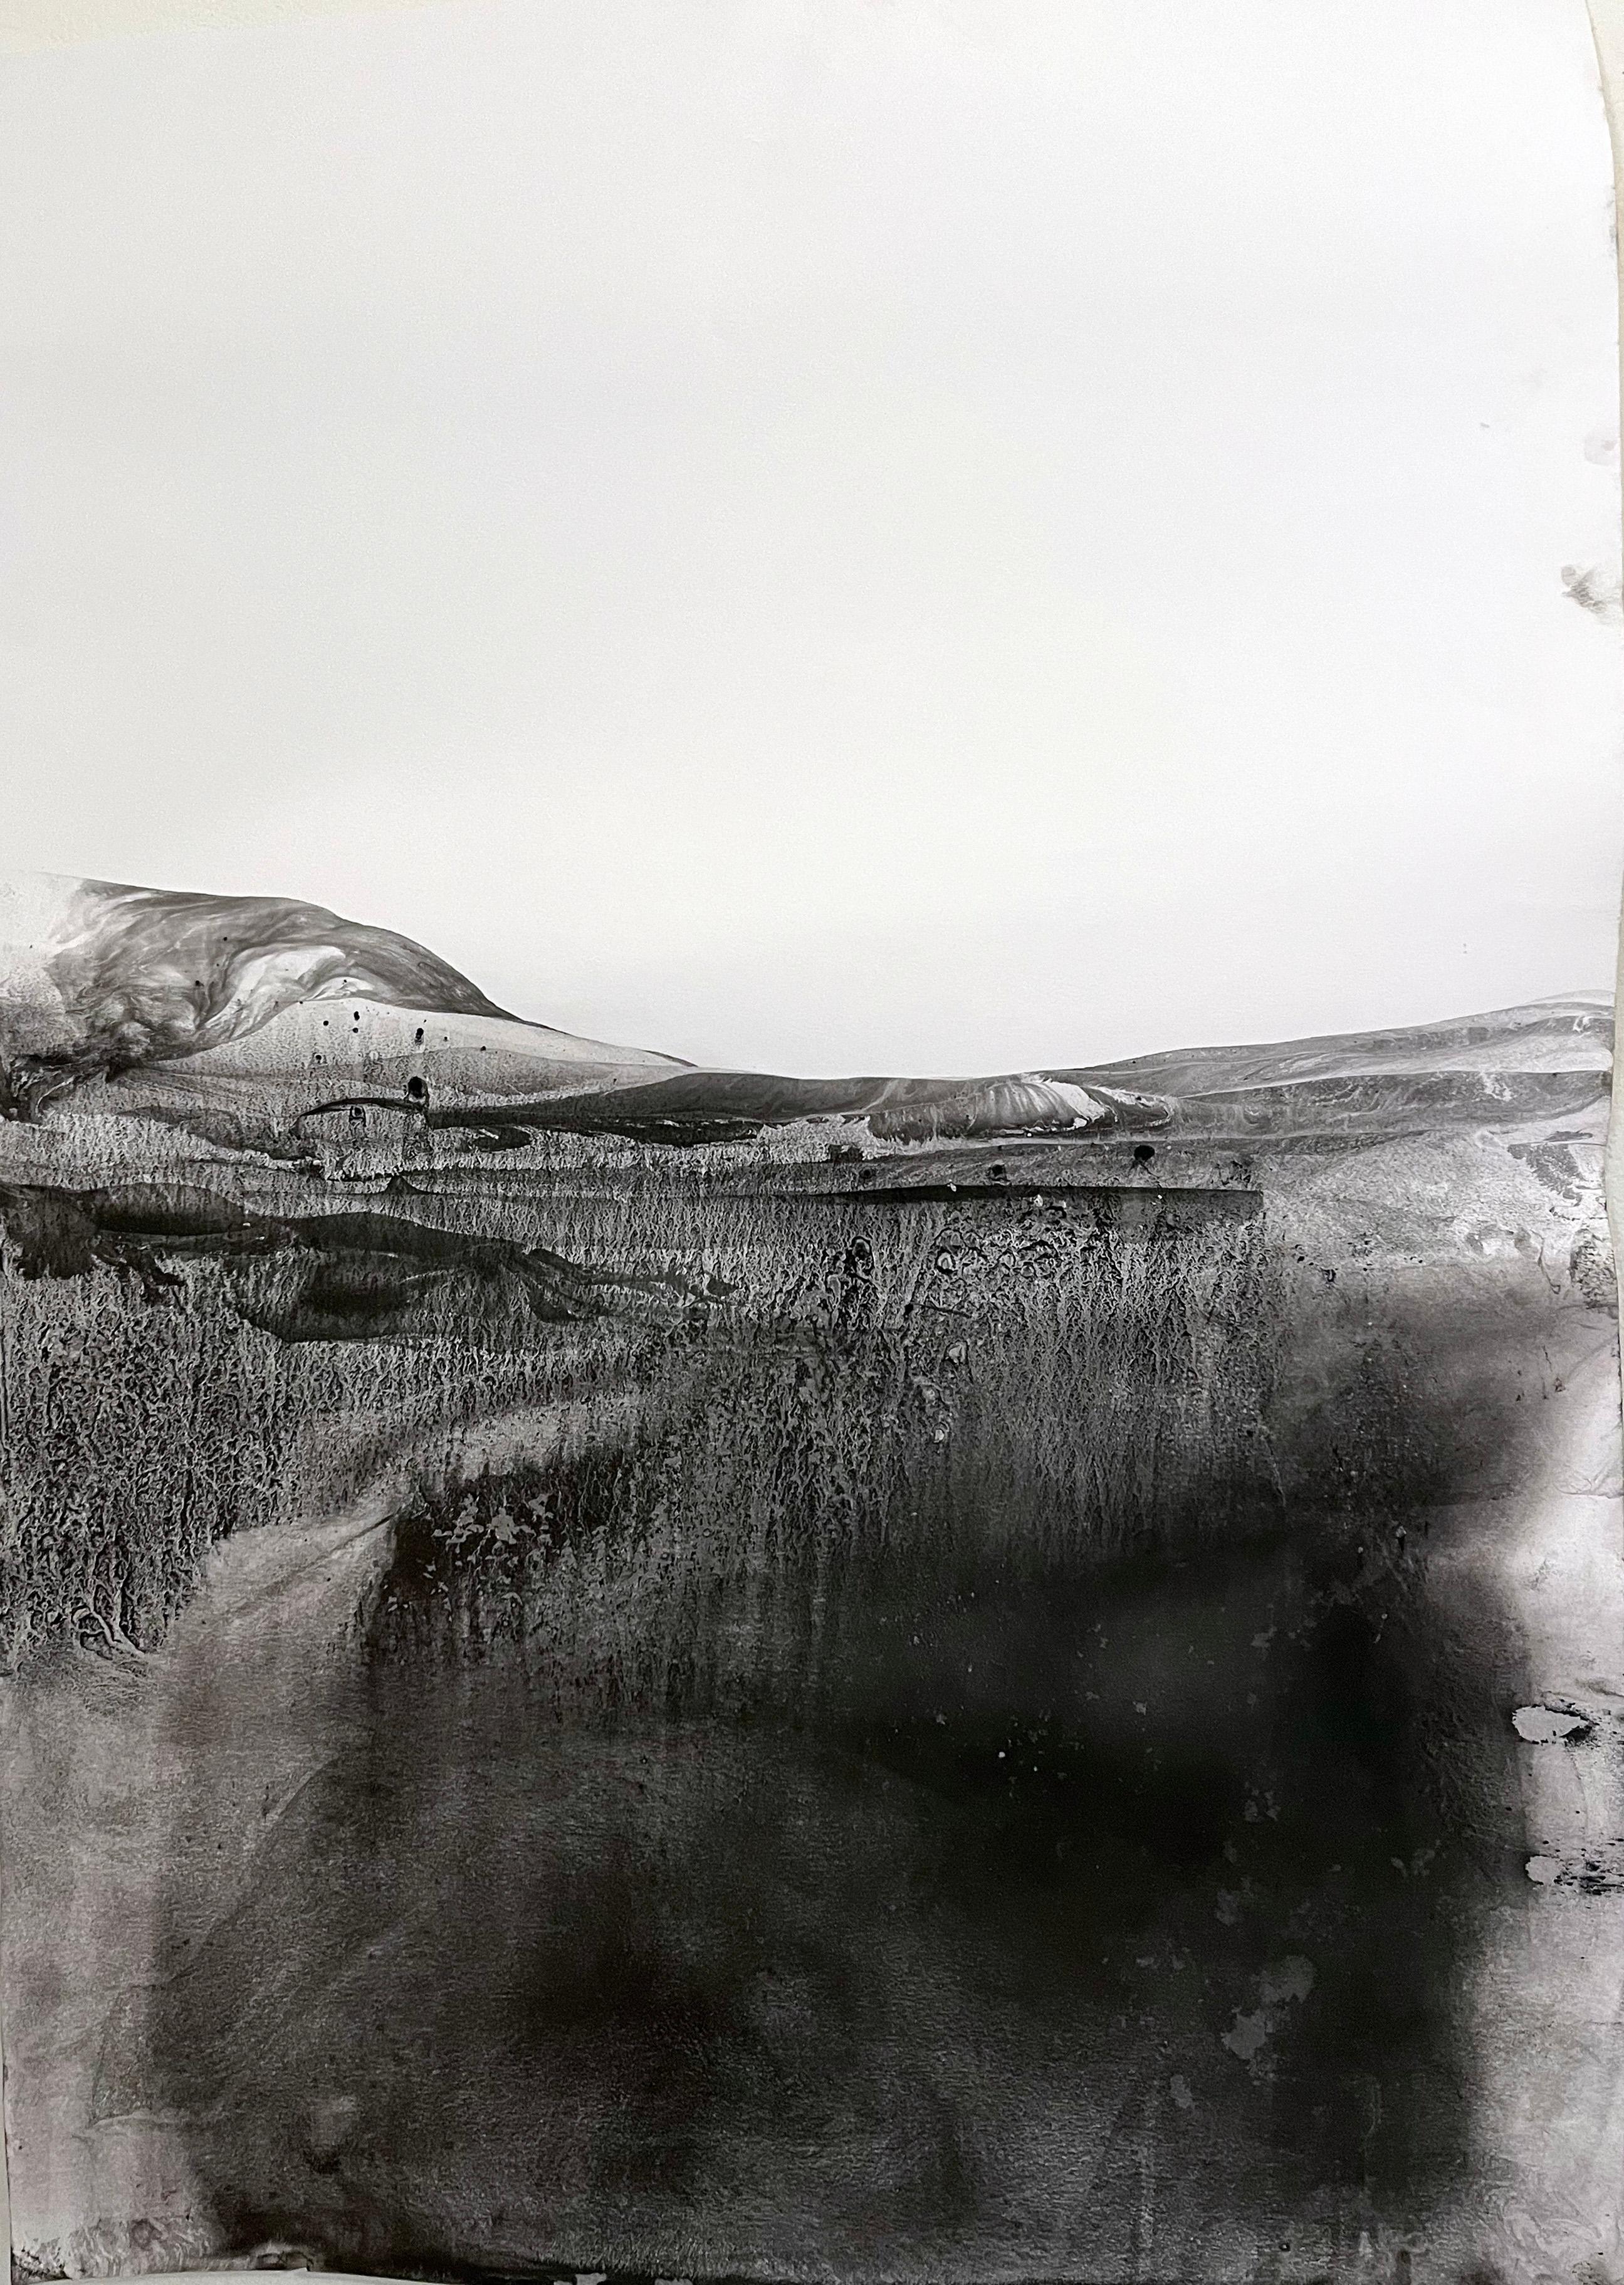 Landscape BW Abstract Drawing - Original Art Made in Italy - Contemporary Painting by Marilina Marchica